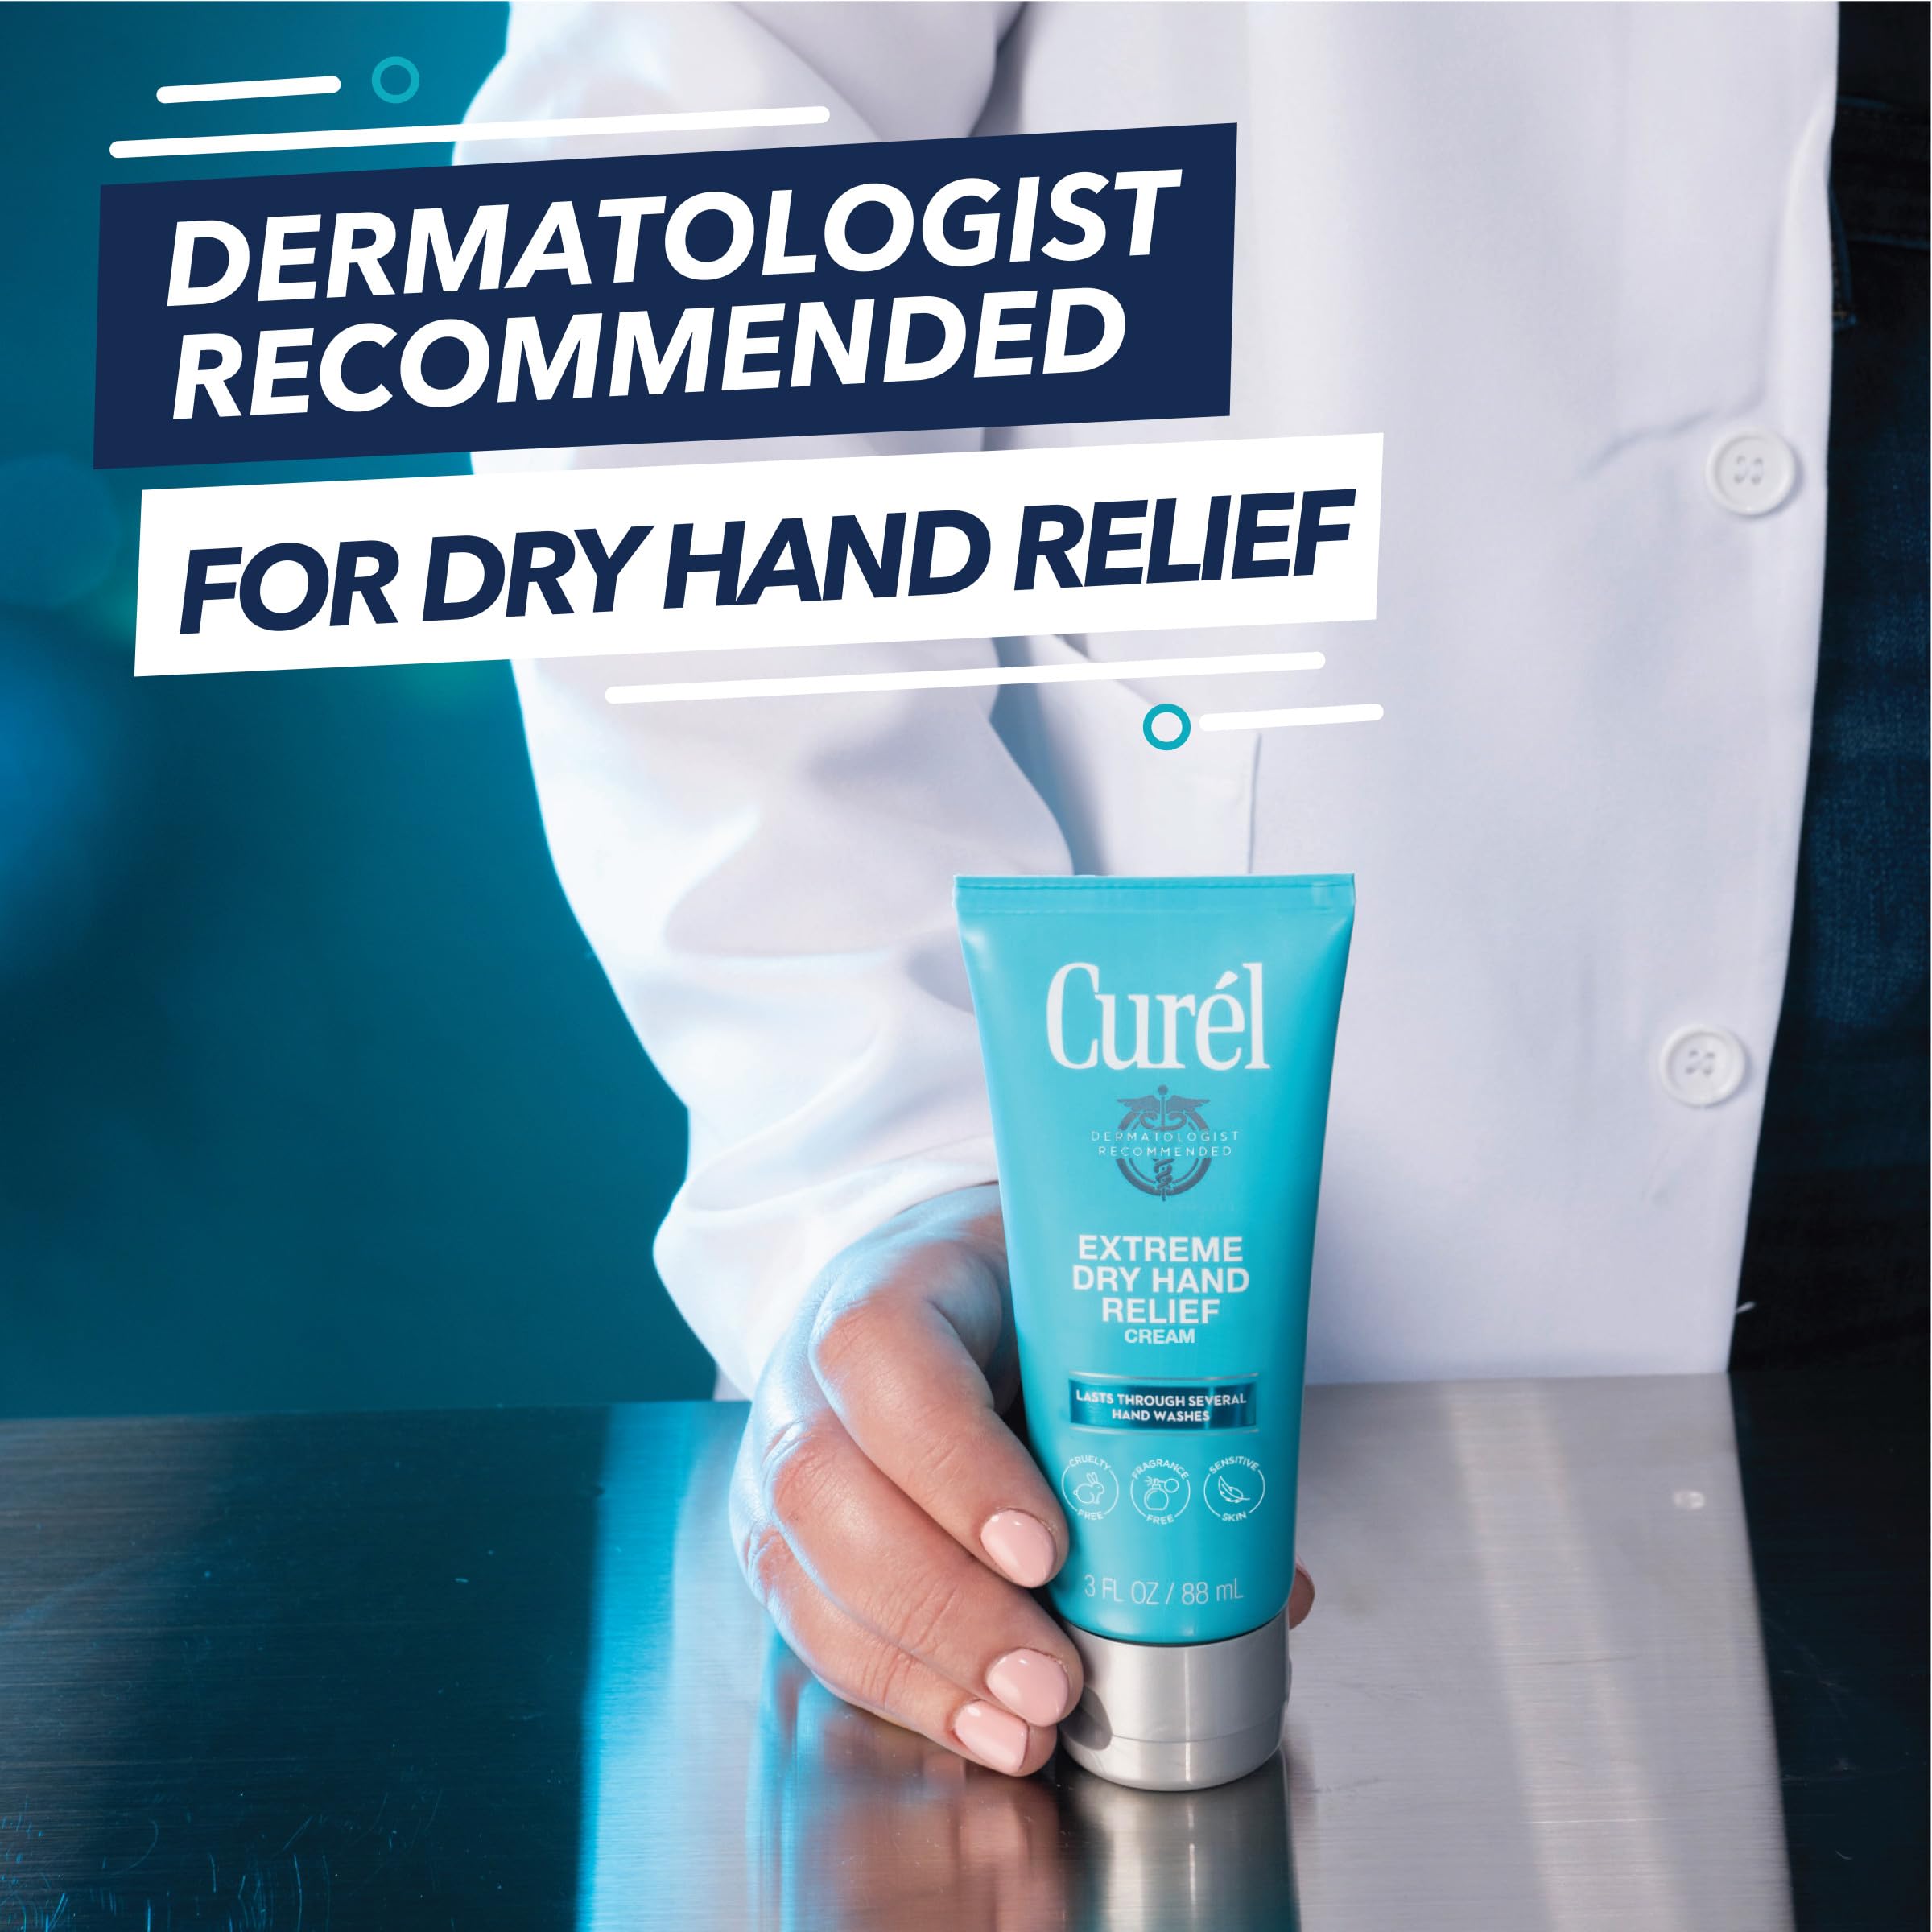 Curel Hydra Therapy In Shower Lotion, Wet Skin Moisturizer for Dry or Extra-dry Skin & Extreme Dry Hand Dryness Relief, Travel Size Hand Cream, Easily Absorbed for Long-Lasting Relief